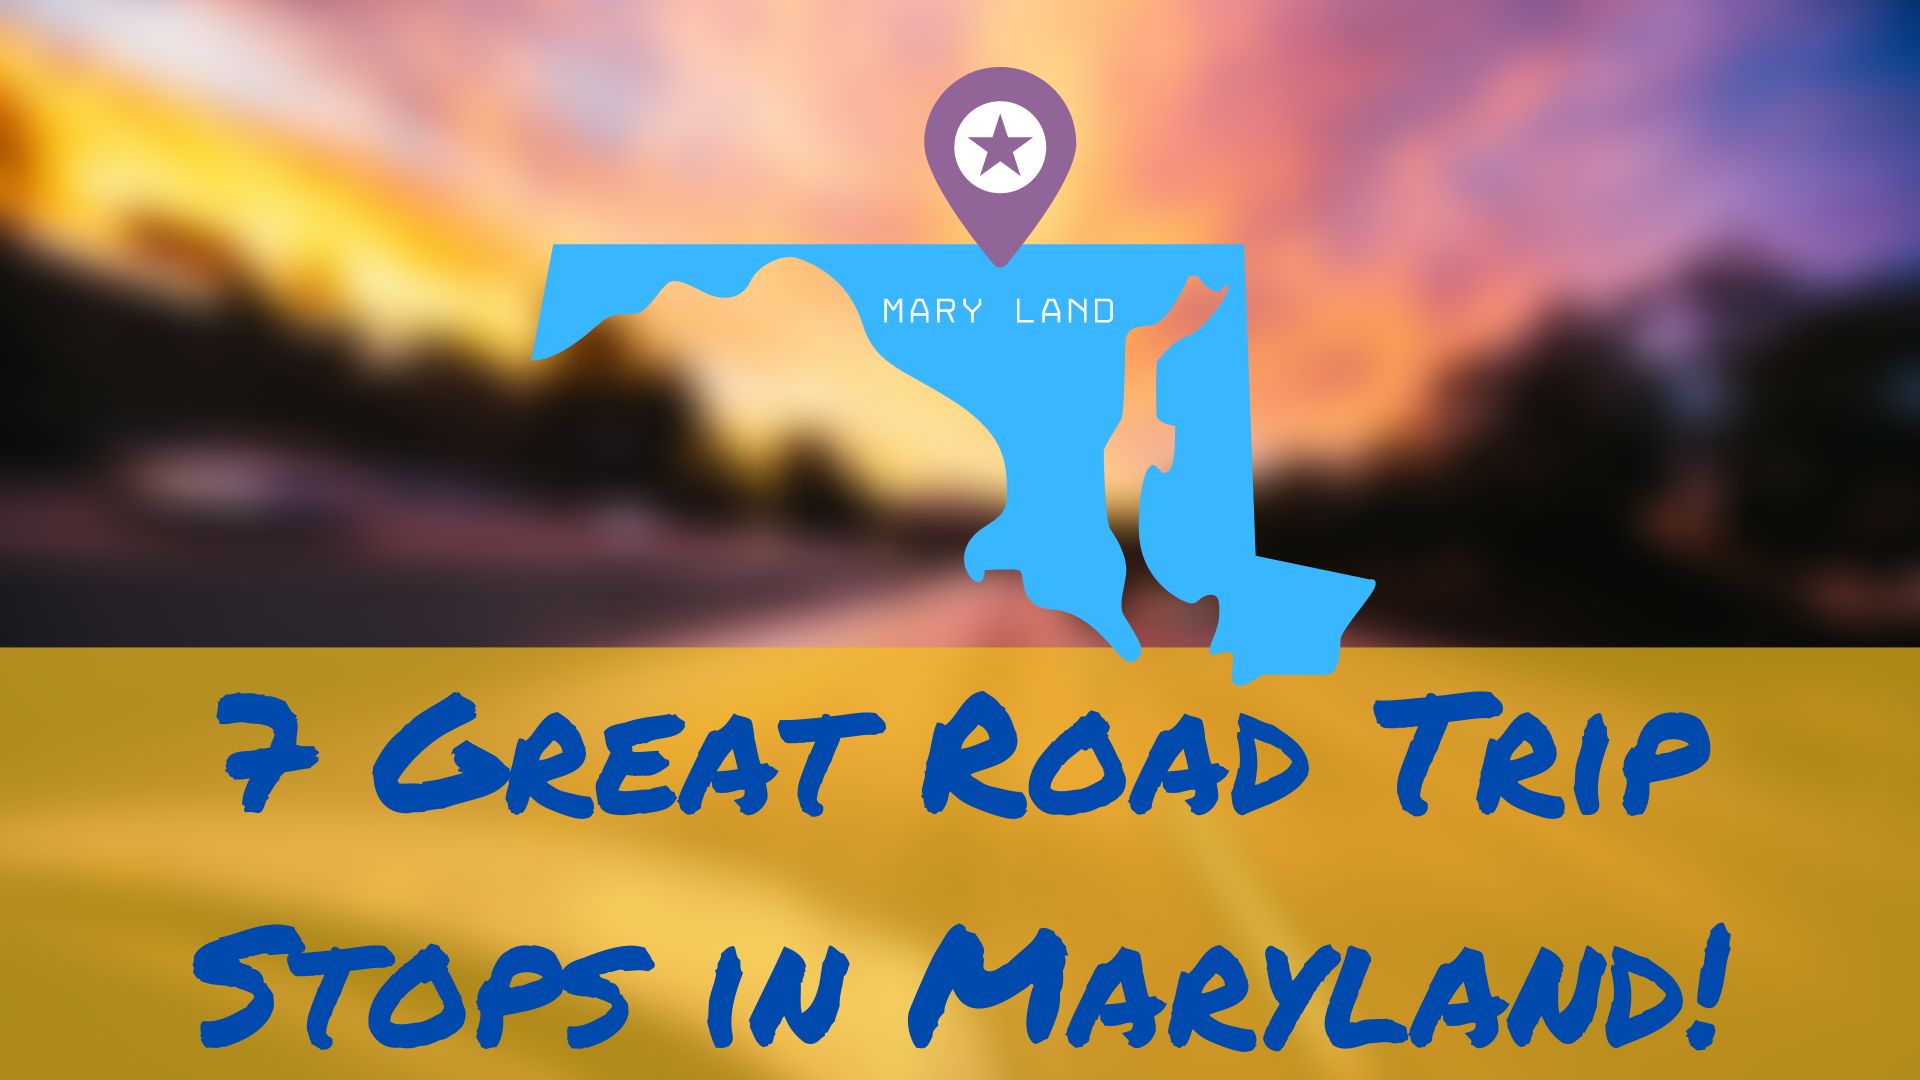 7 Great Road Trip Stops in Maryland